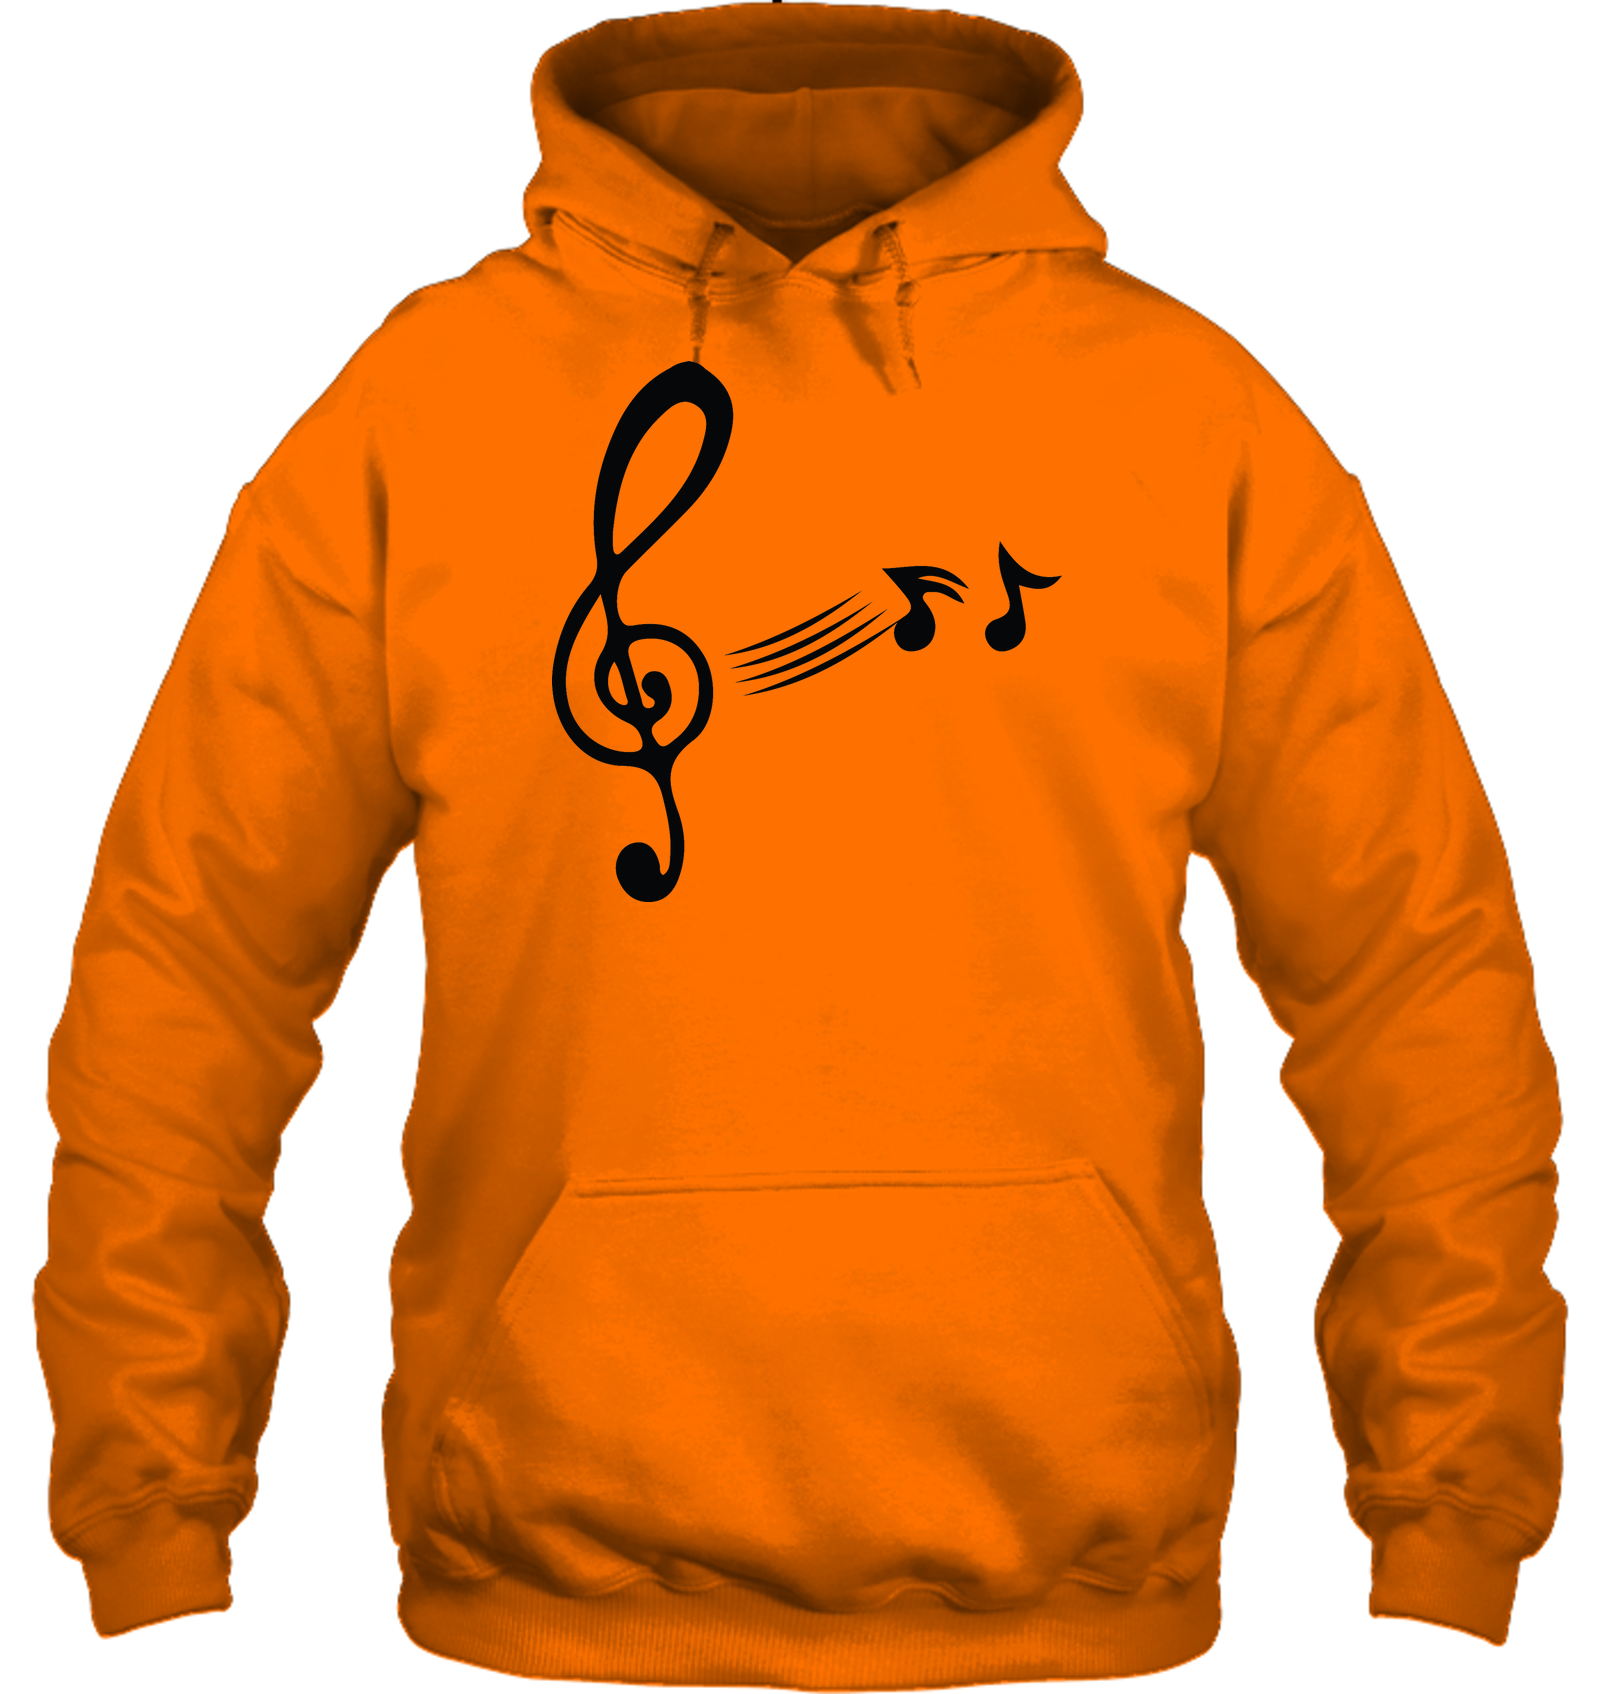 Treble Clef with floating Notes - Gildan Adult Heavy Blend™ Hoodie